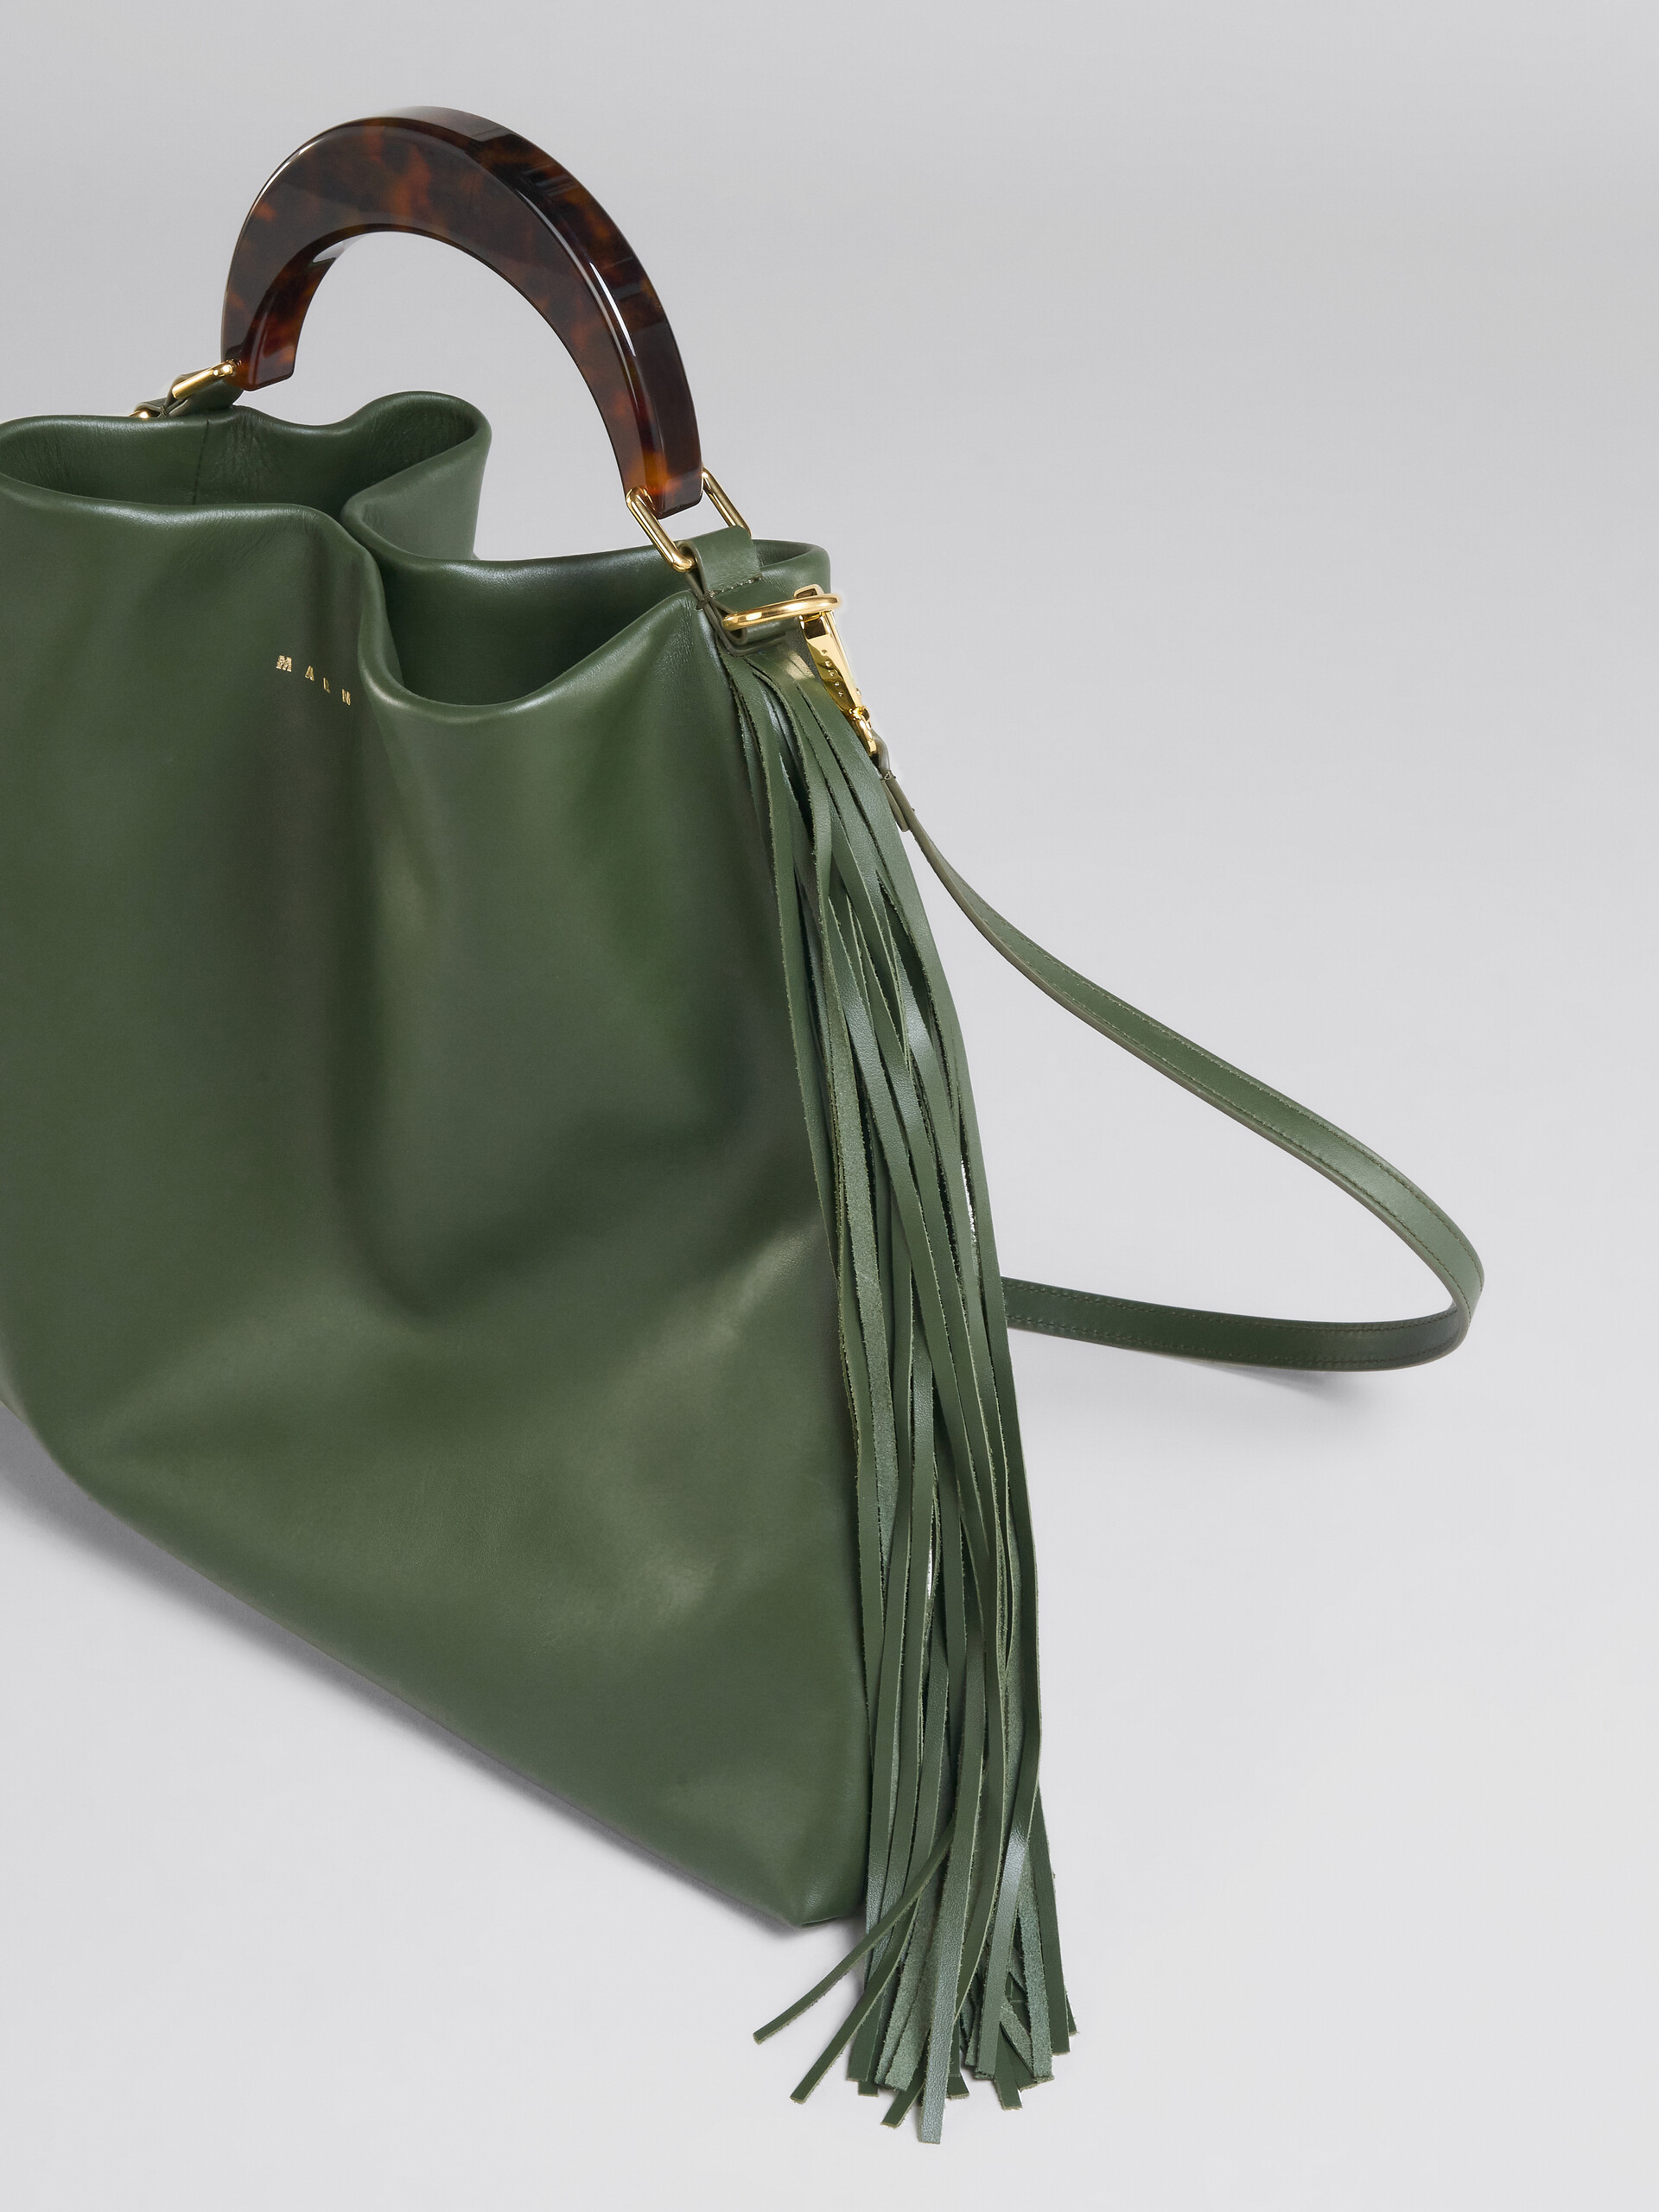 Venice Medium Bag in green leather with fringes - Shoulder Bags - Image 5